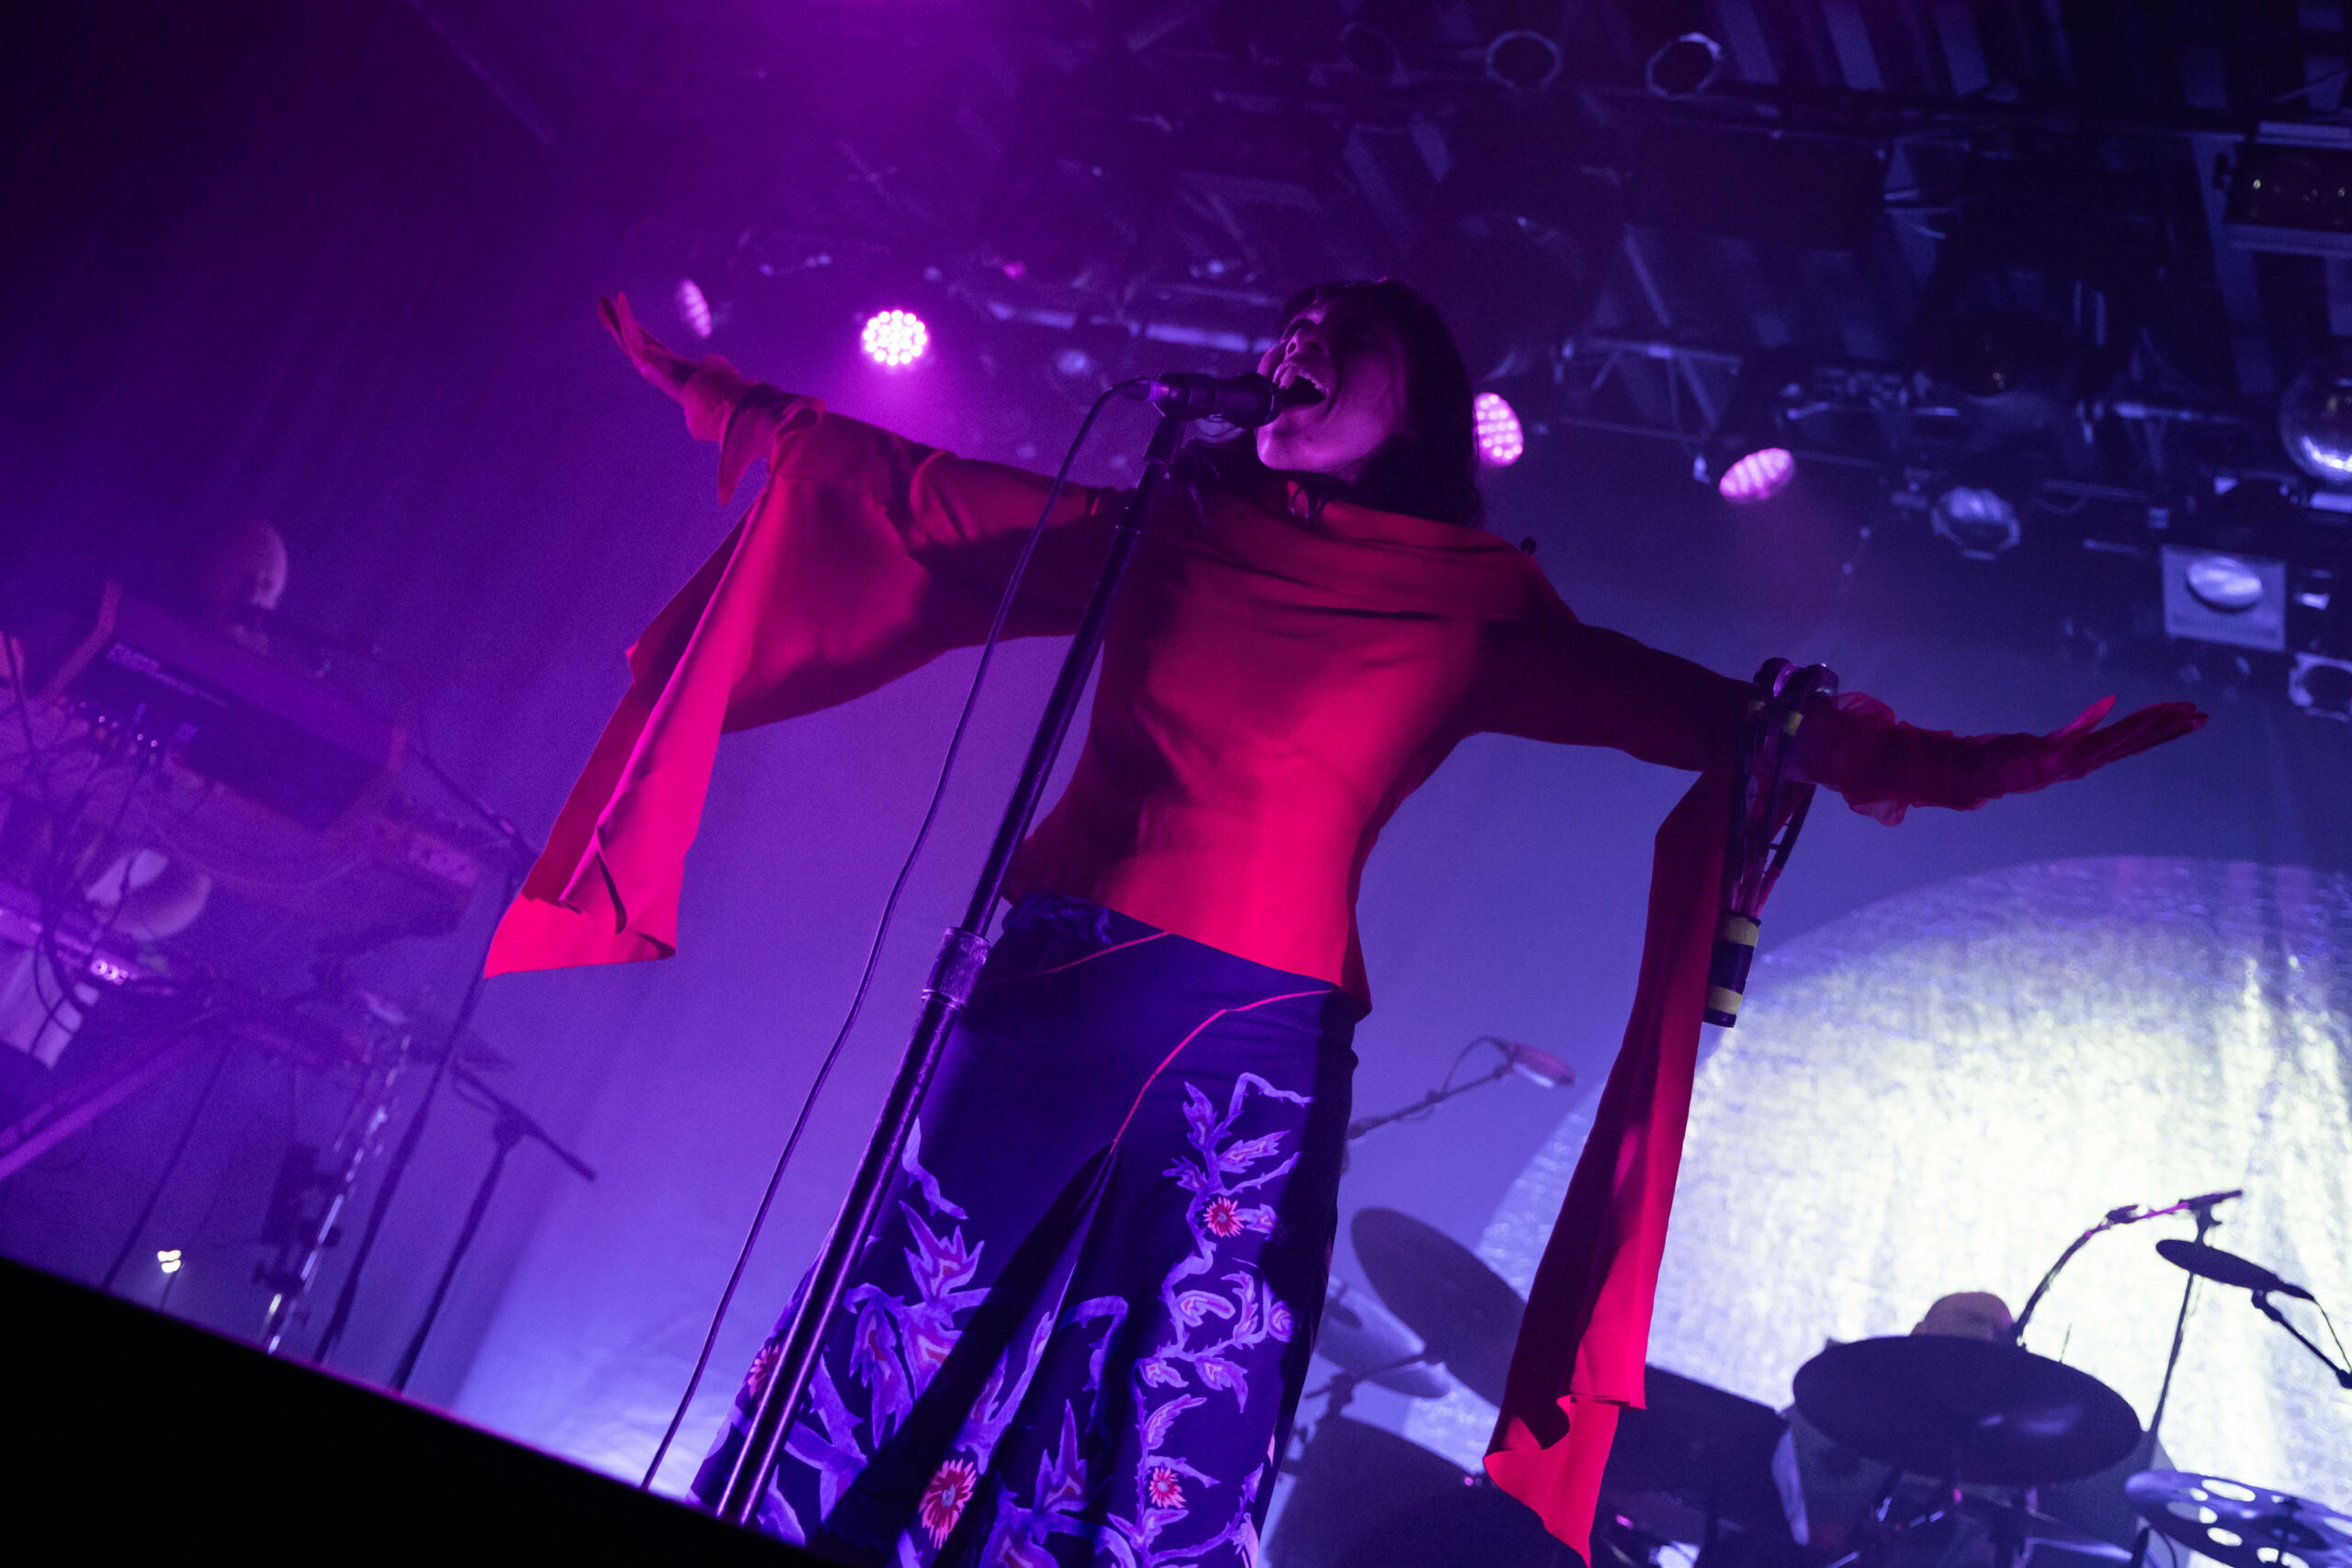 The lead singer of Little Dragon spreads her arms and sings on the stage at the Commodore Ballroom